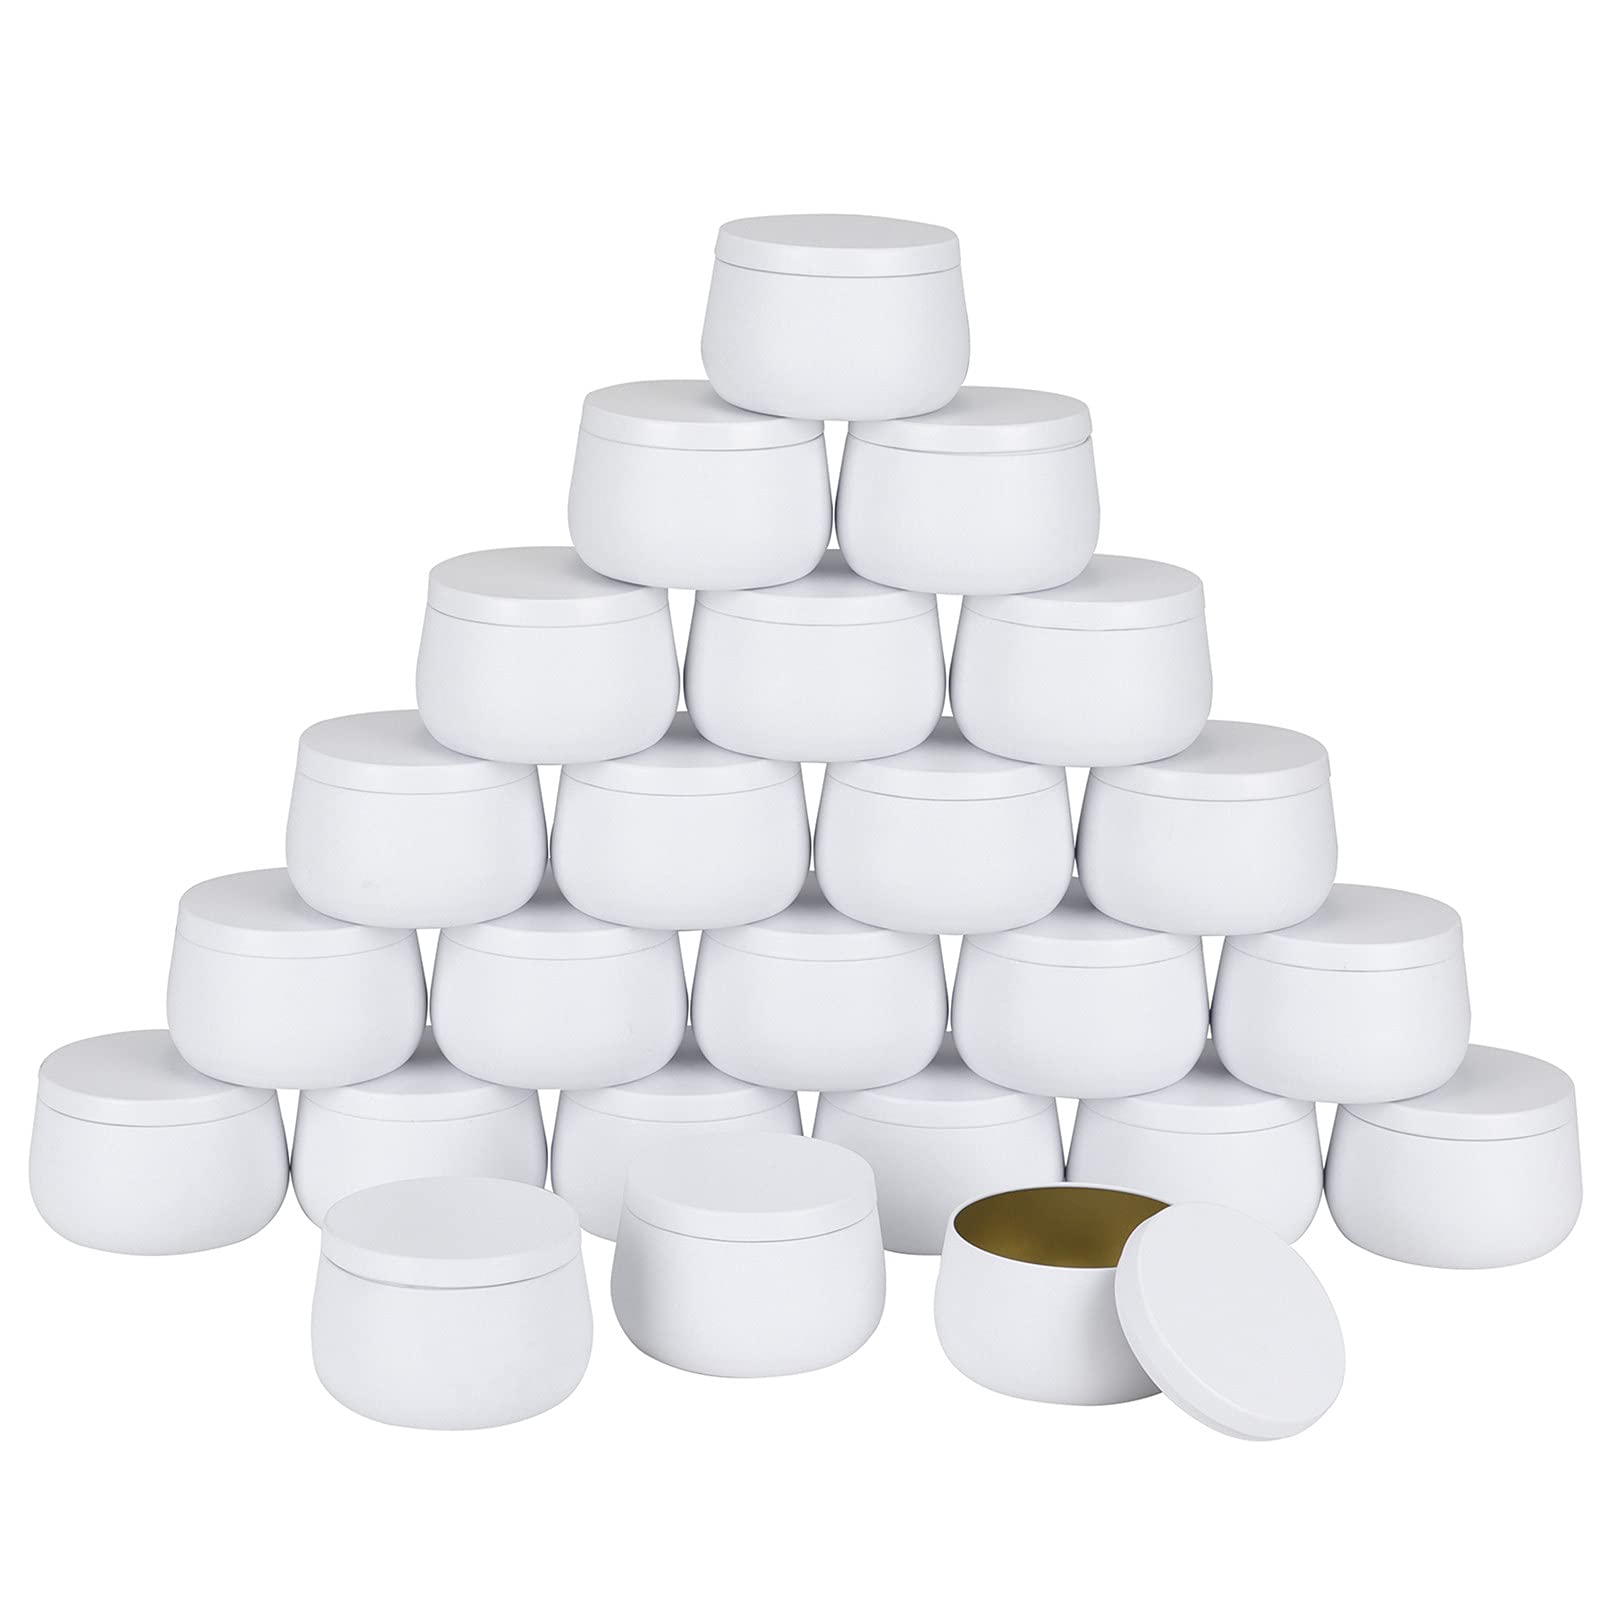 NEXBEXES 8oz candle tins with lids,white candle jars,bulk candle tins for making candles,candle making jars(24pack, white)